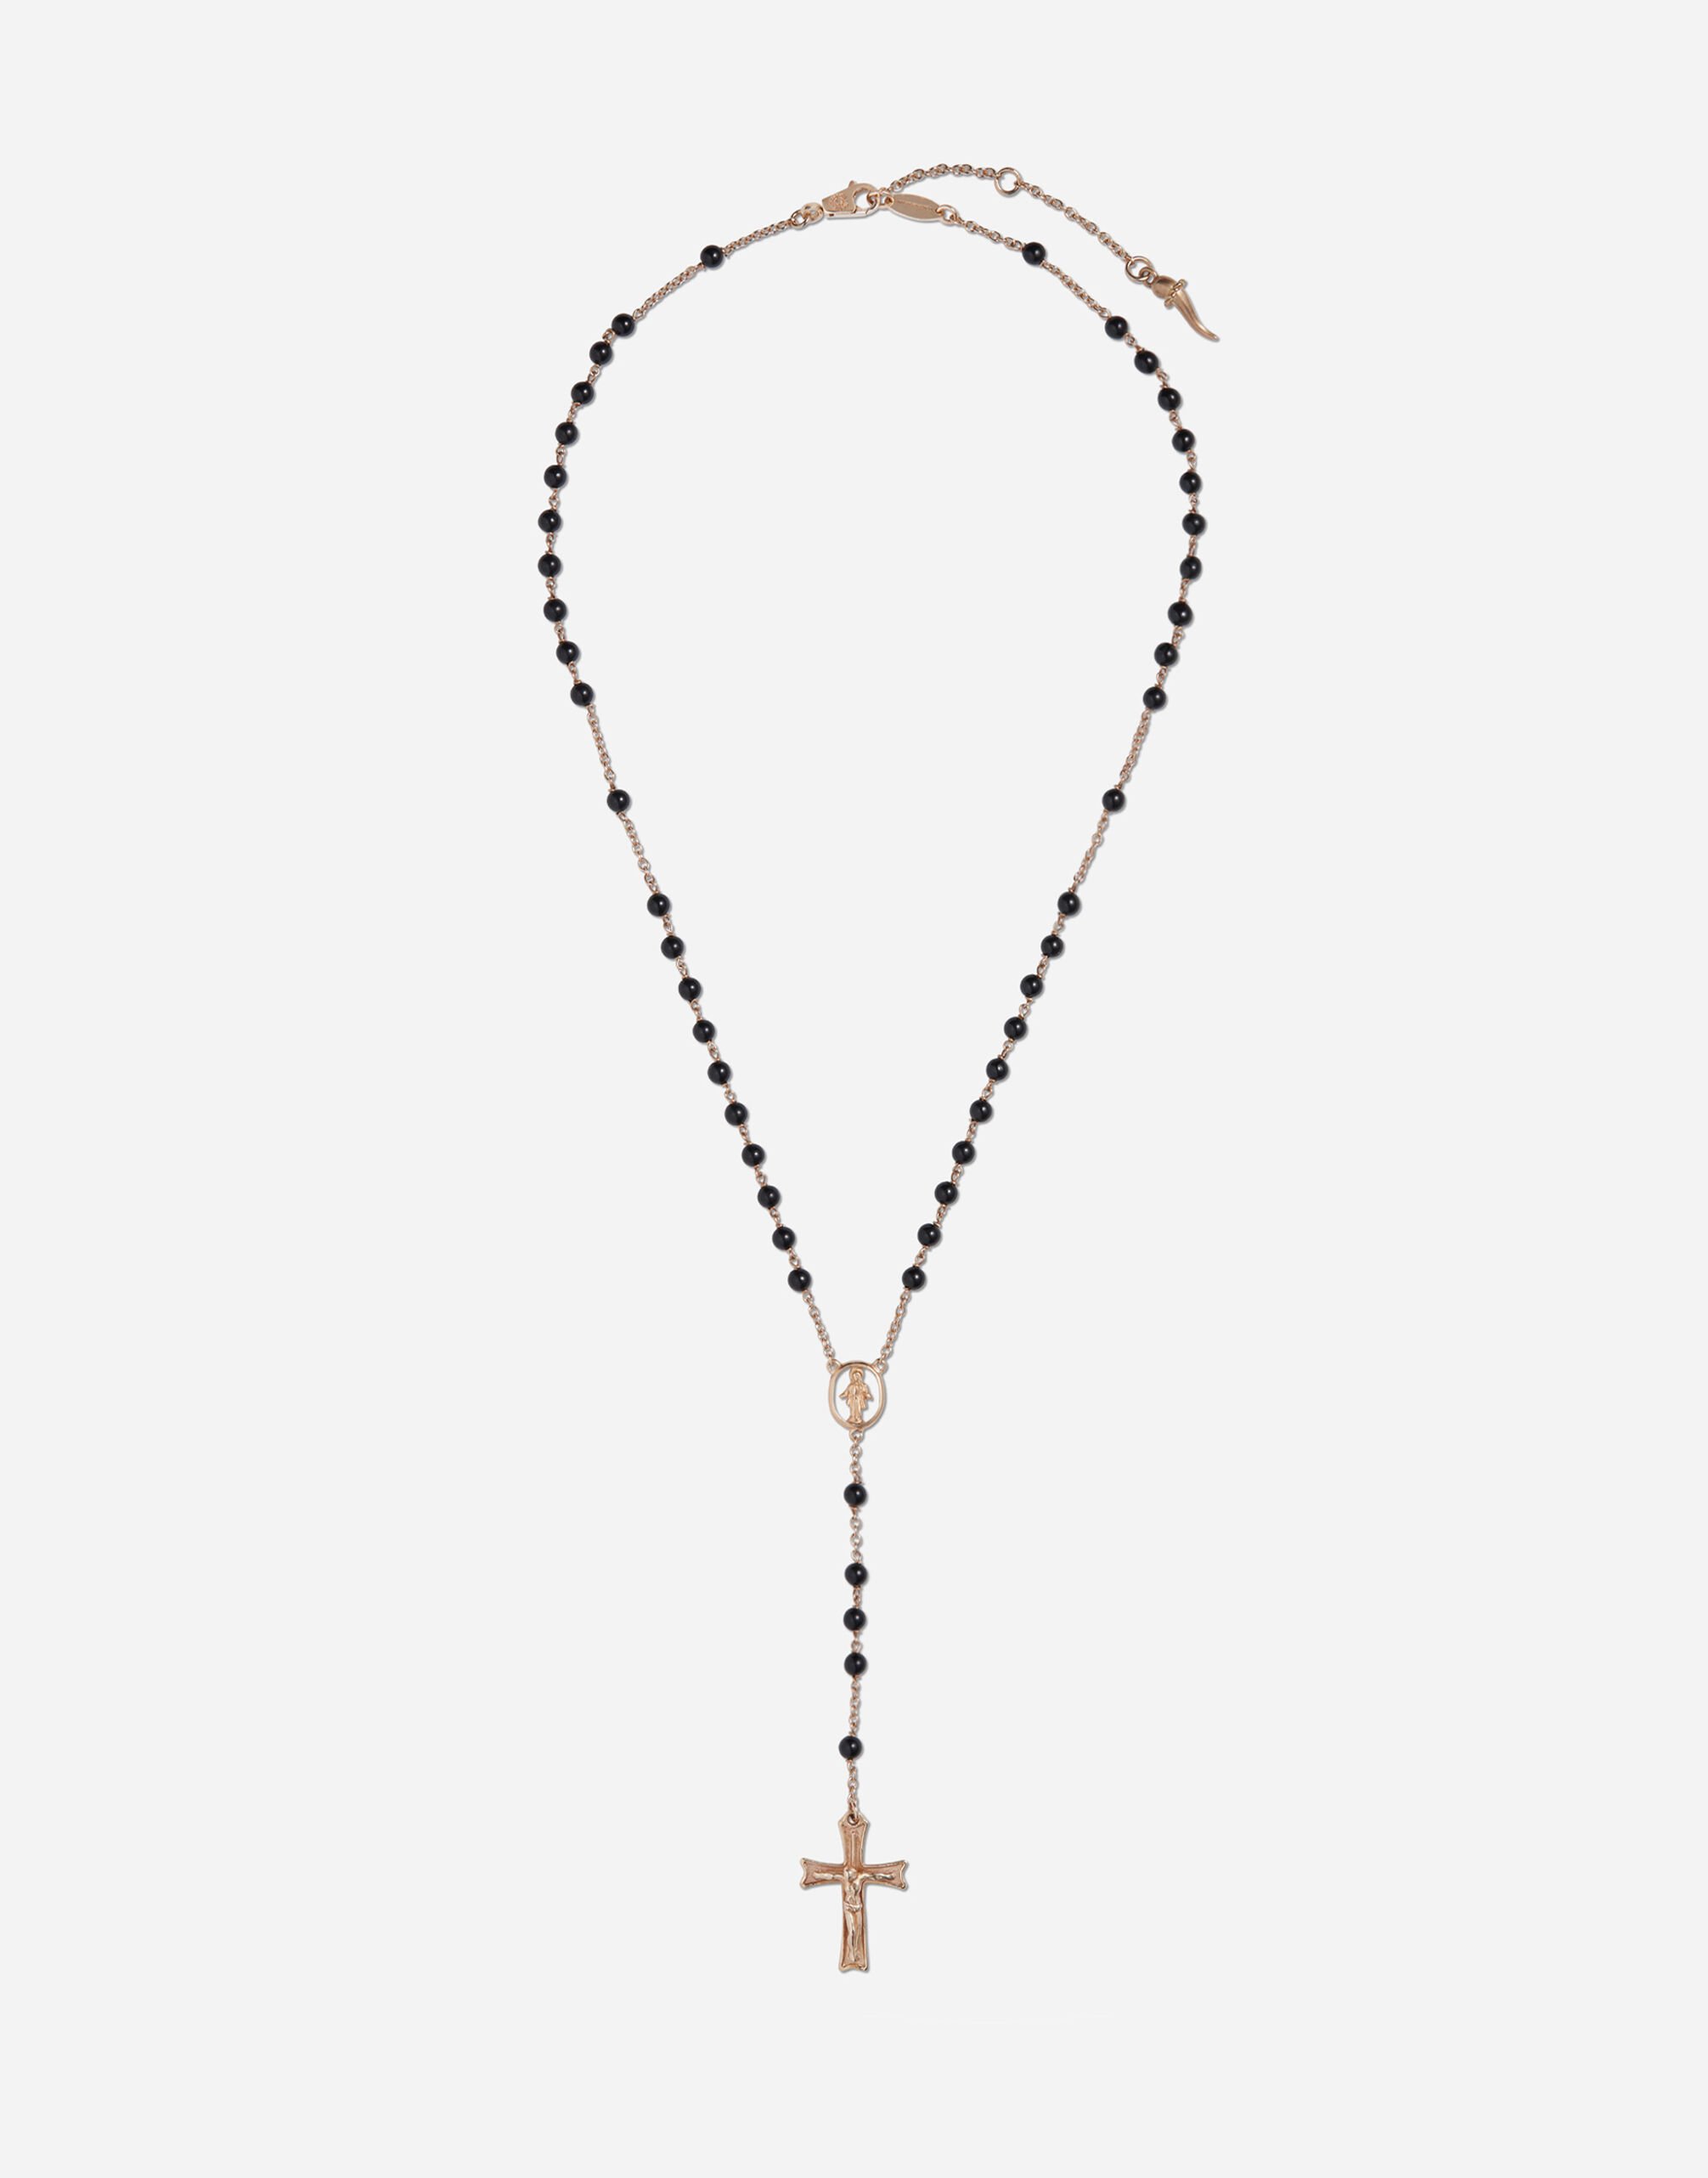 Dolce & Gabbana Yellow gold Devotion rosary necklace with black jade spheres Gold WNP4L2W1111